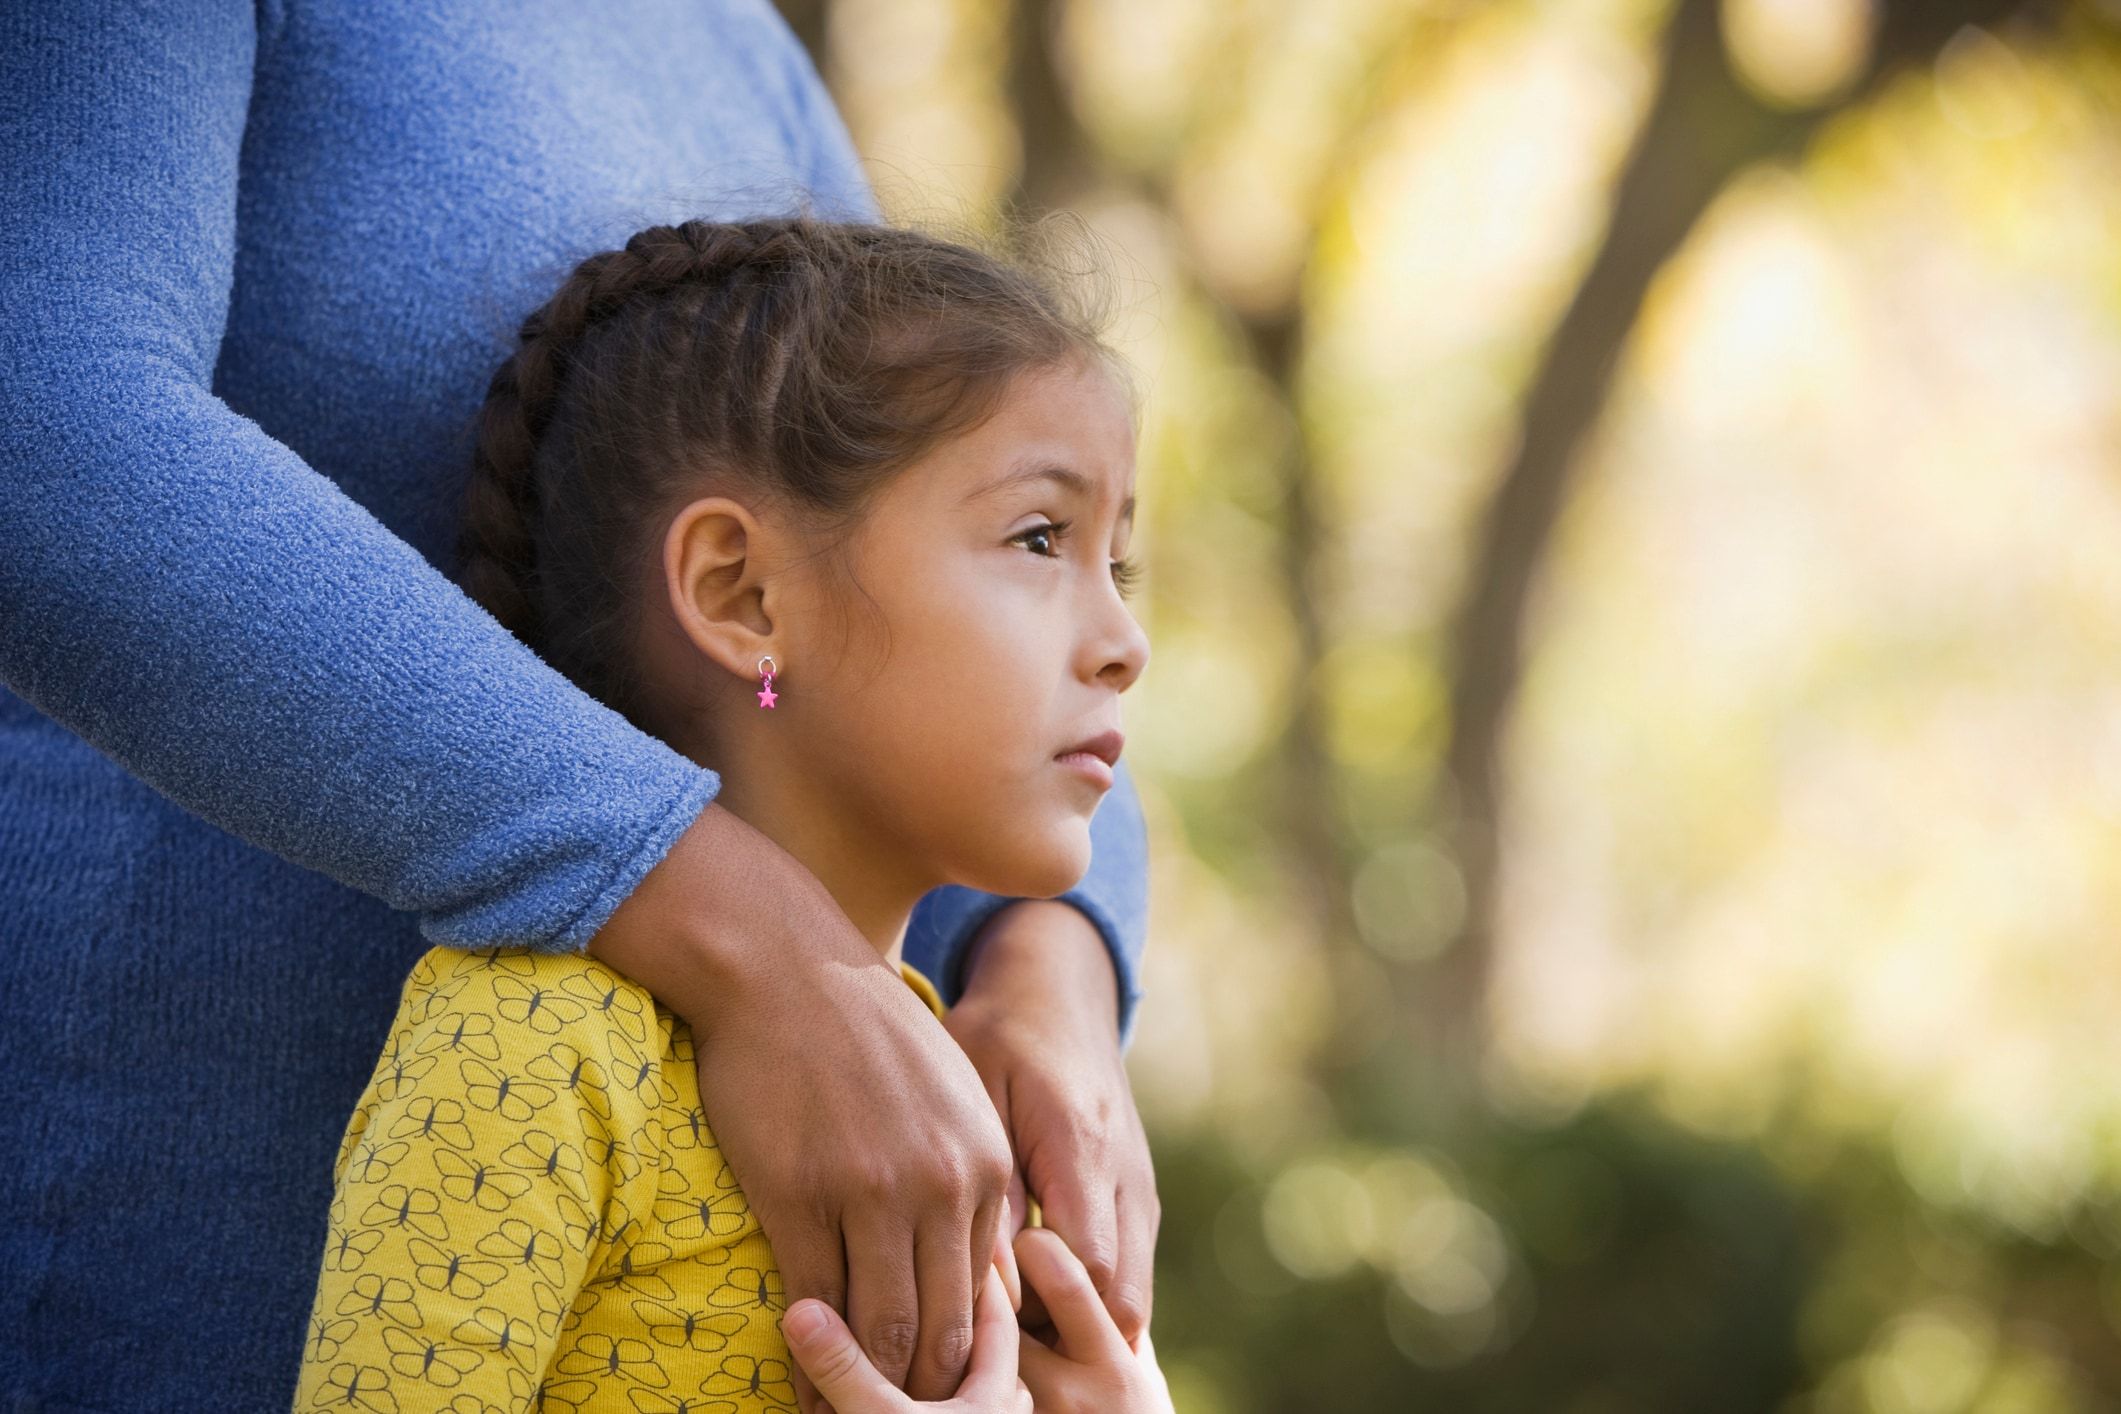 Anxiety in kids: What are the signs and when to seek help